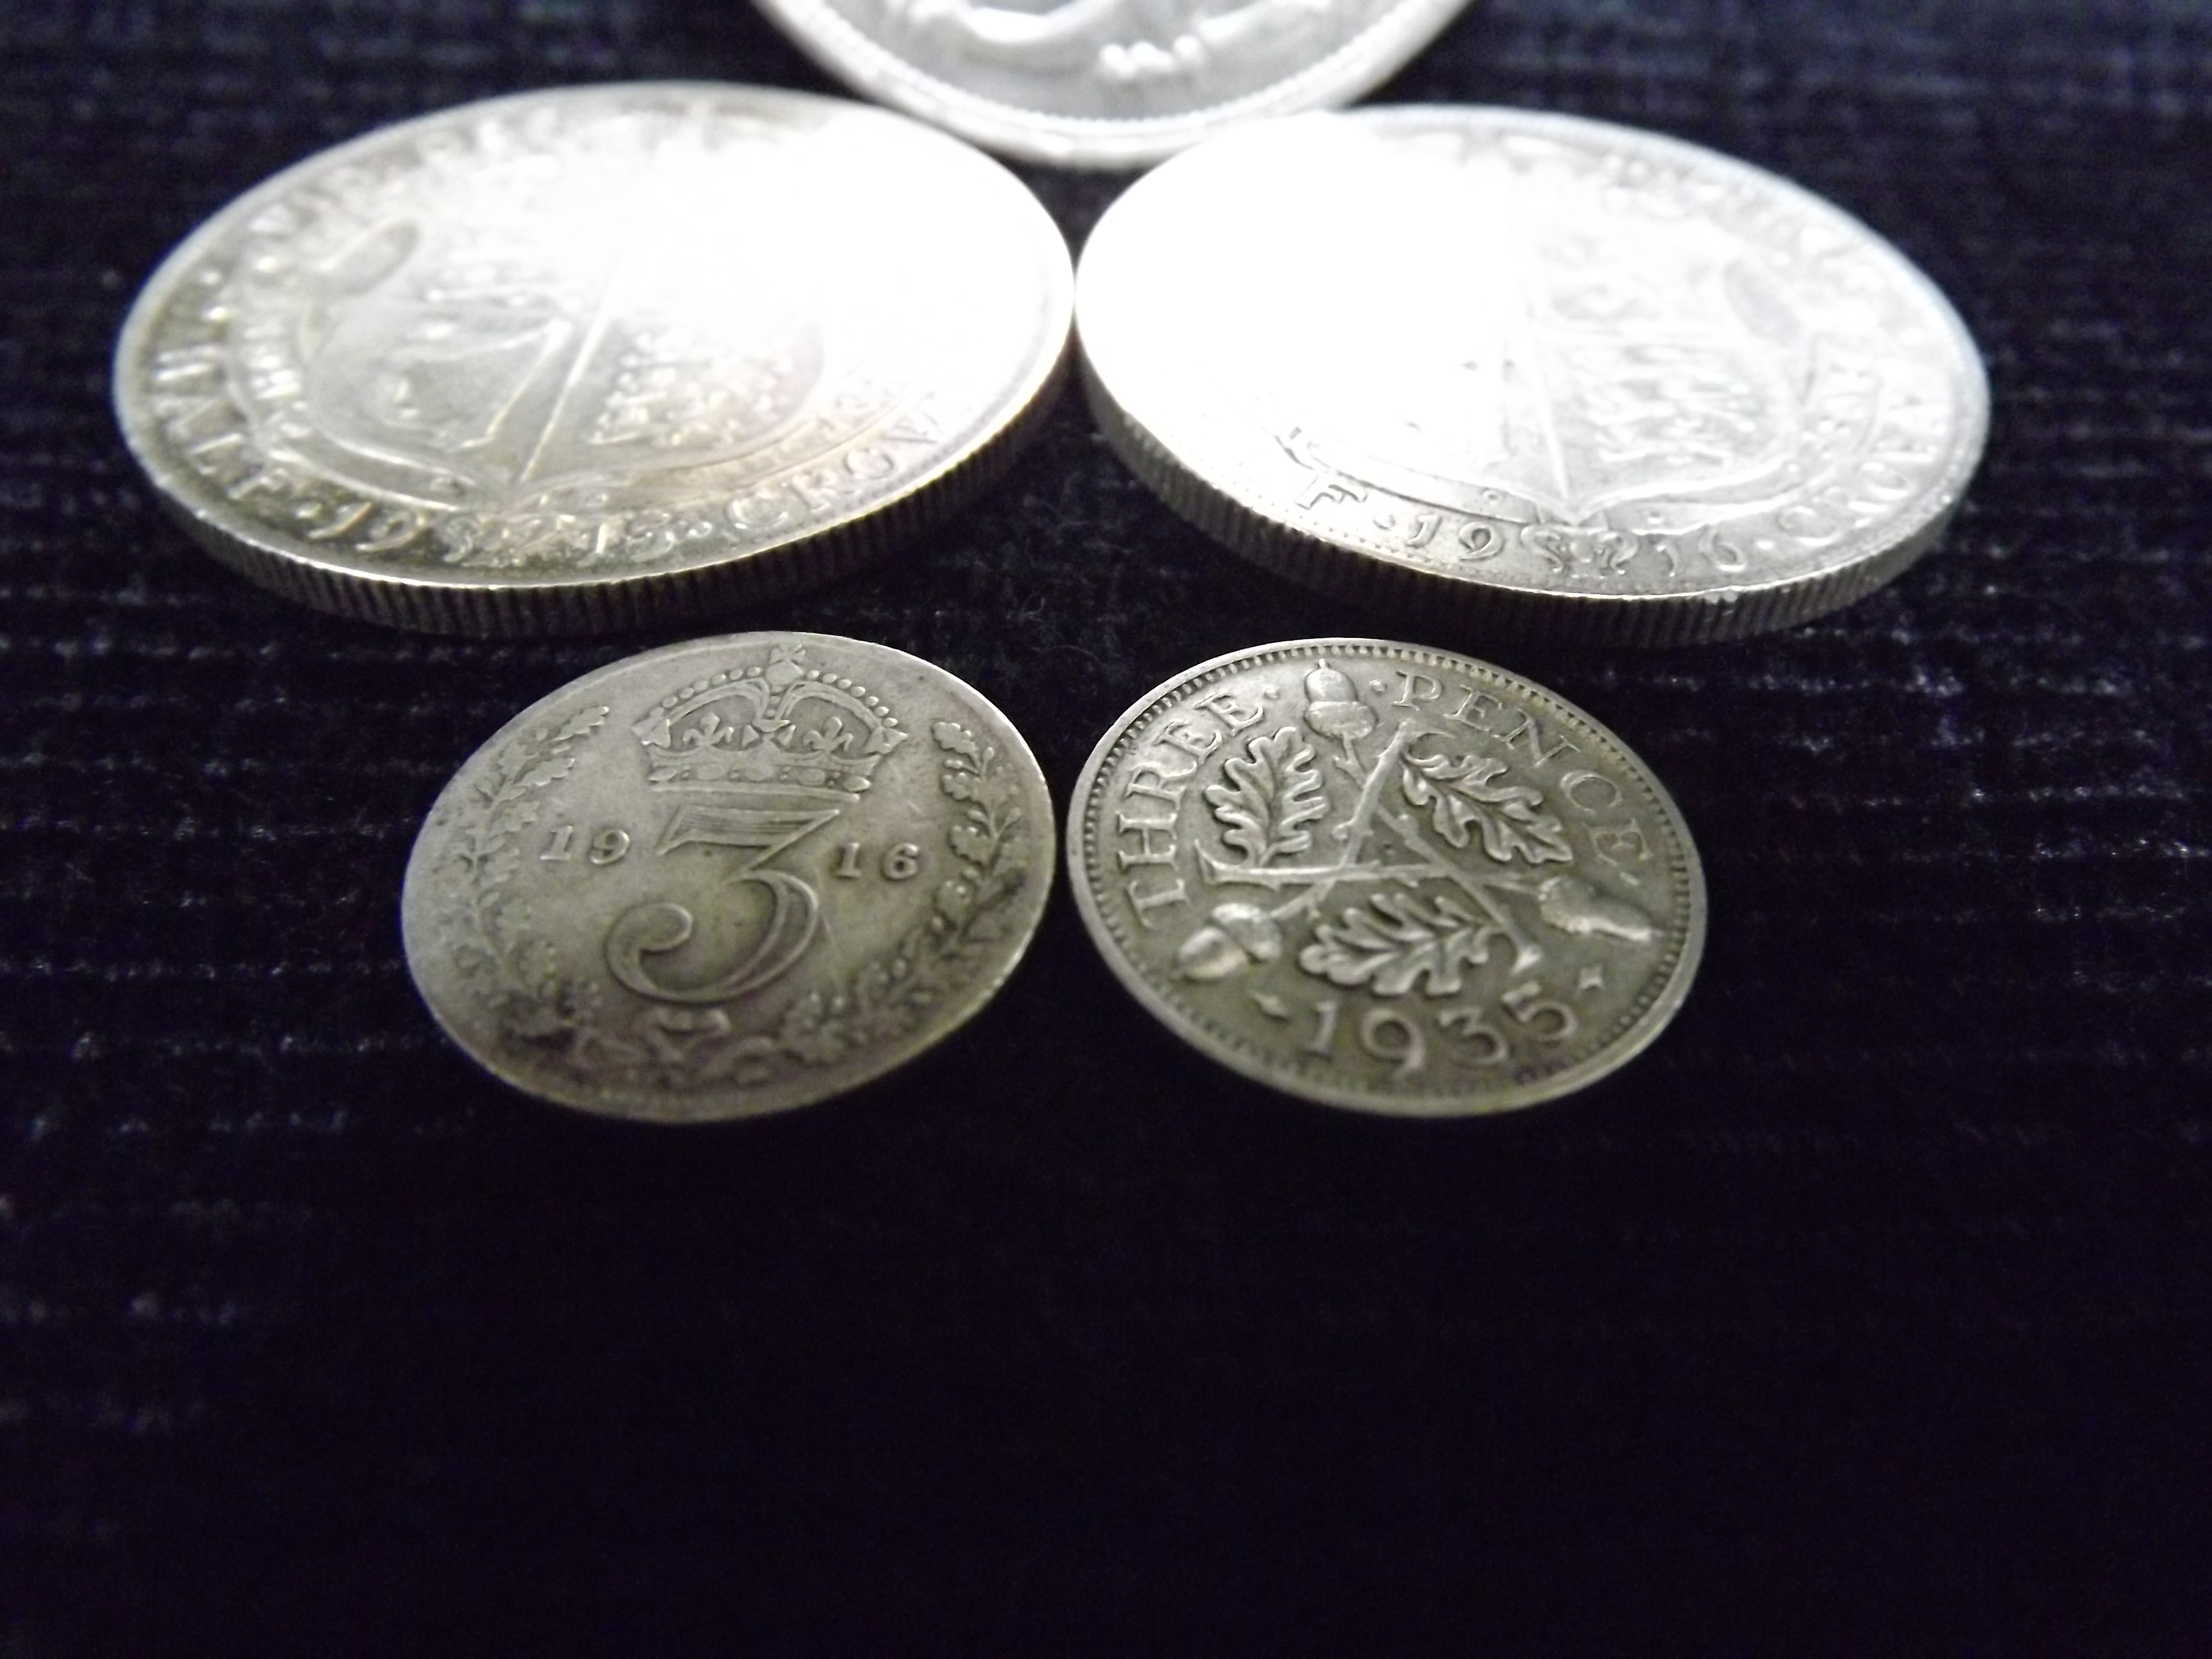 5 x George V Coins. GB Royal Mint. 1 x 1935 Crown, 2 x Half Crown 1915 & 1916 and 2 x Sixpences 1916 - Image 7 of 10